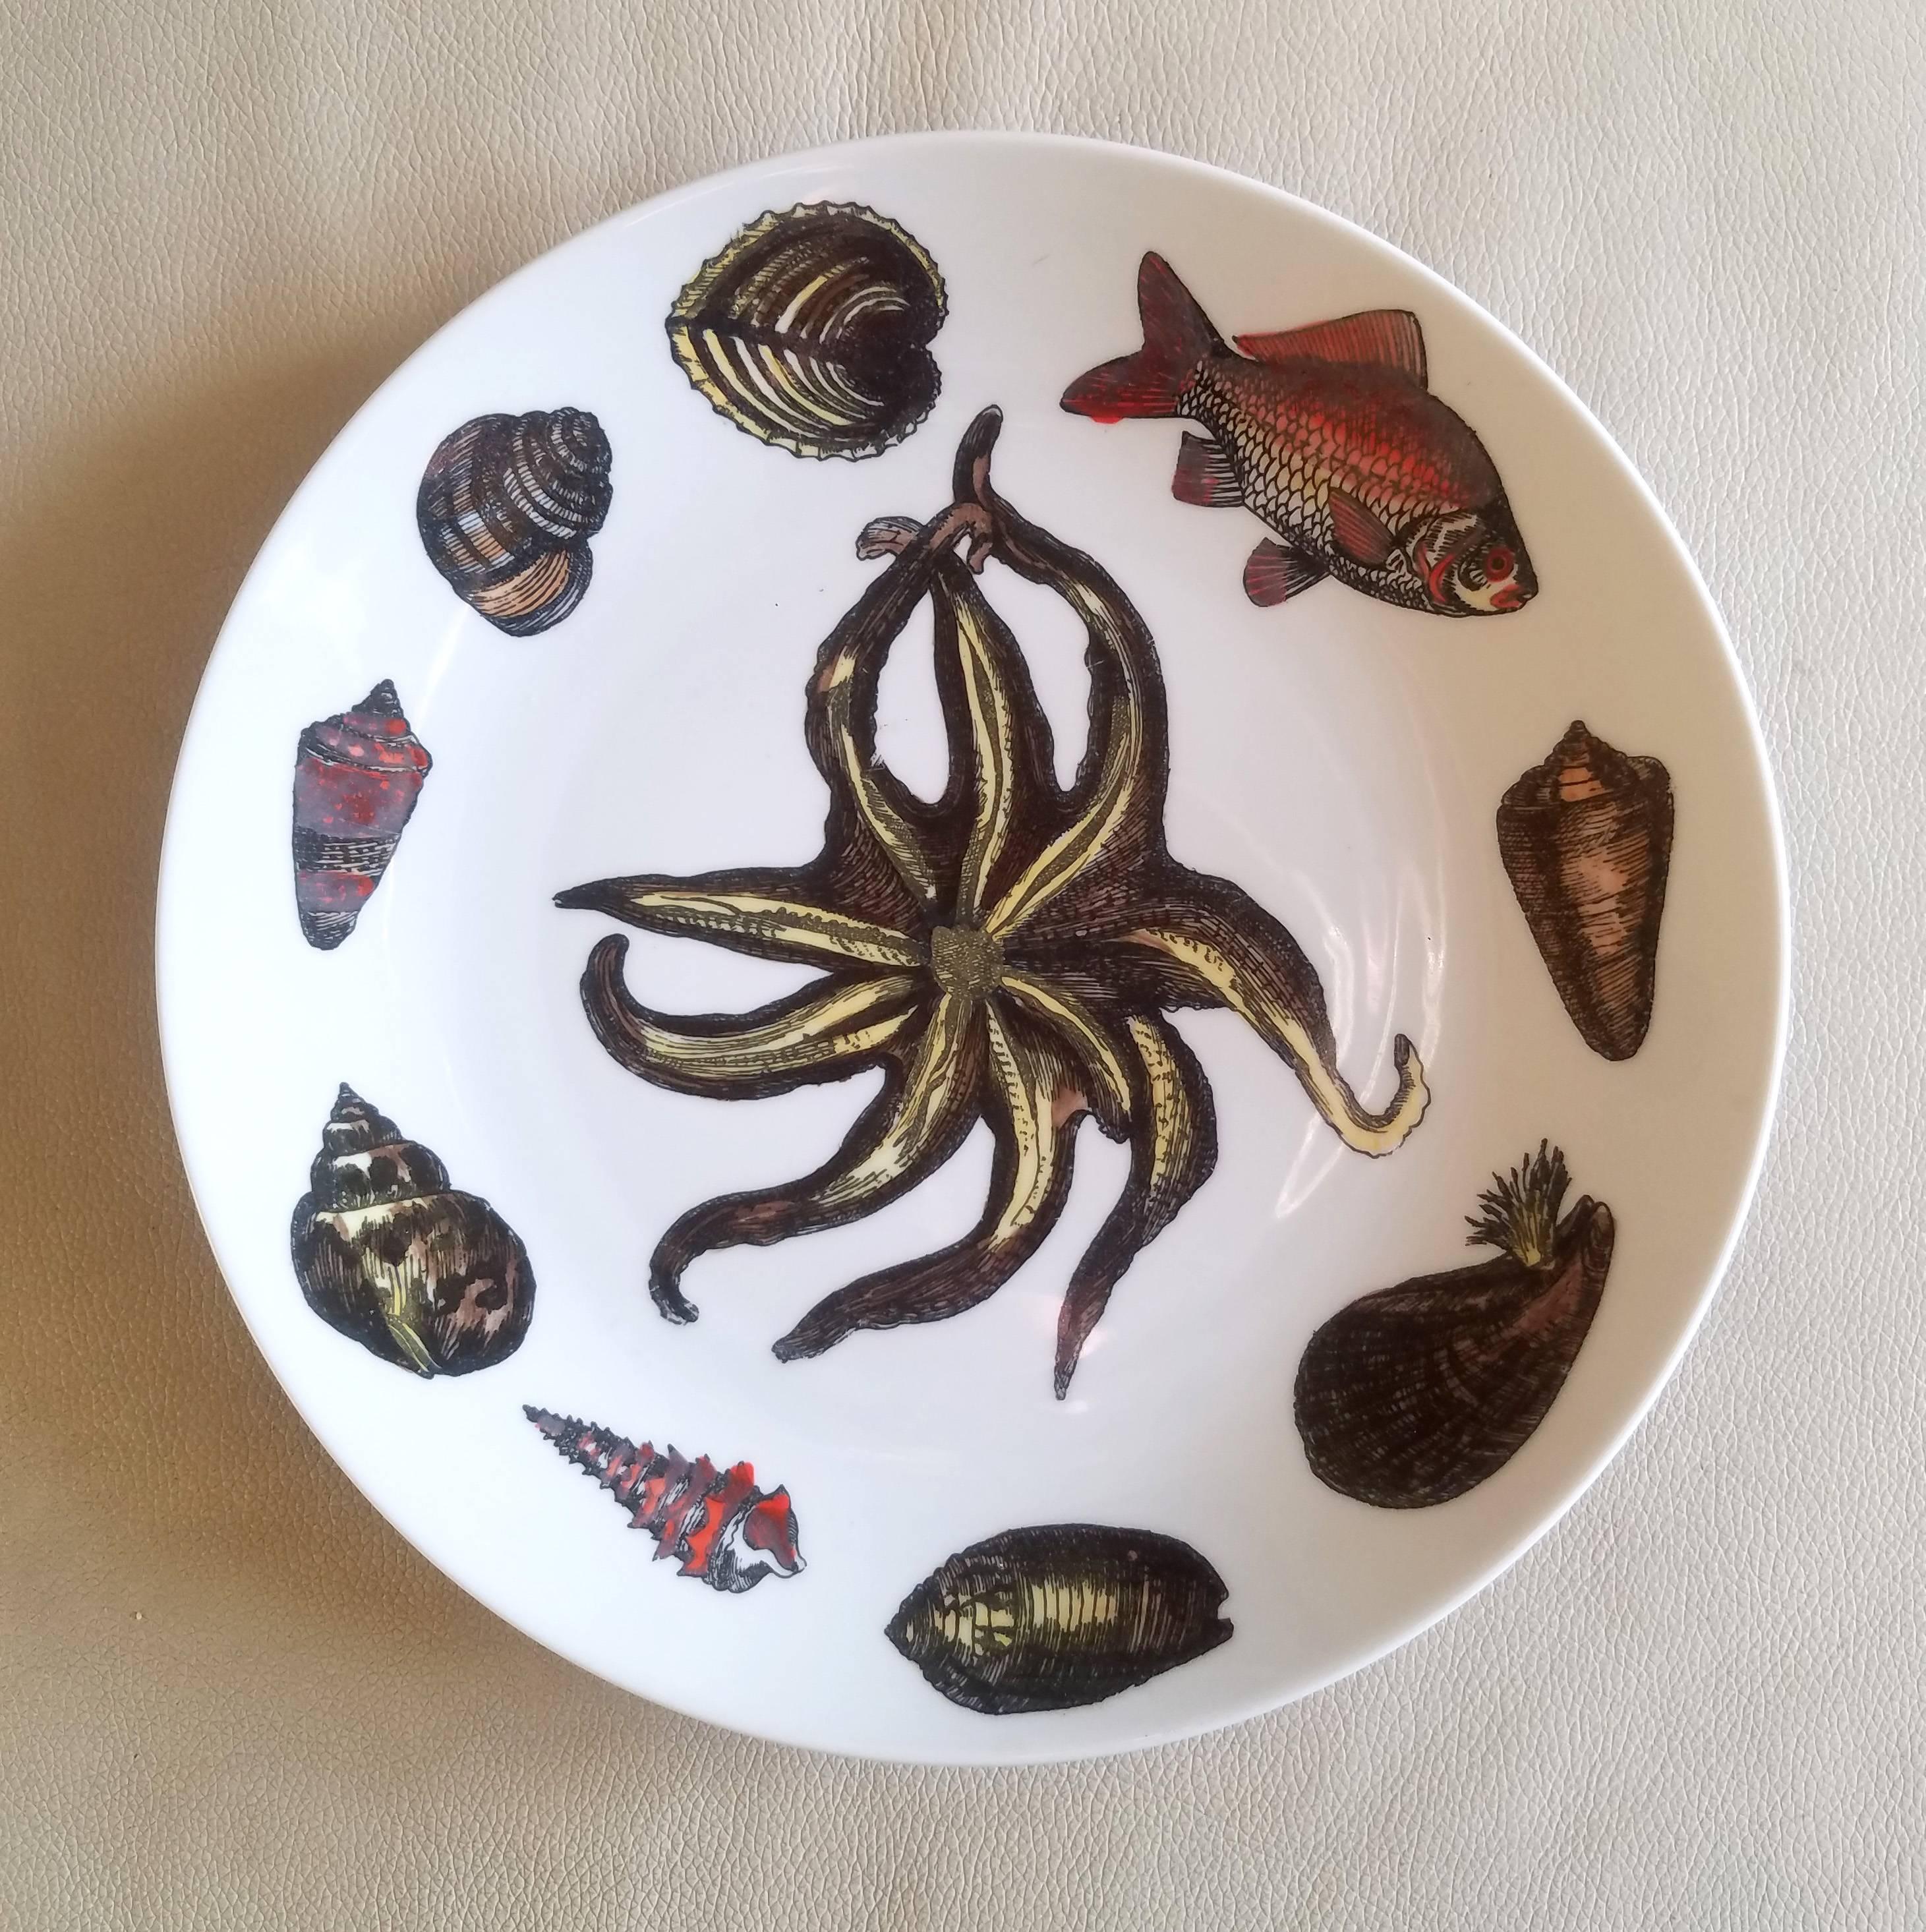 Piero Fornasetti porcelain rare dinner plates decorated with sea anemones, urchins, and sea hells, 
Conchiglie Pattern,
Set of eight (8),
Circa 1960s-early 1970s.

We have additional repeats which can be added to this to make a larger